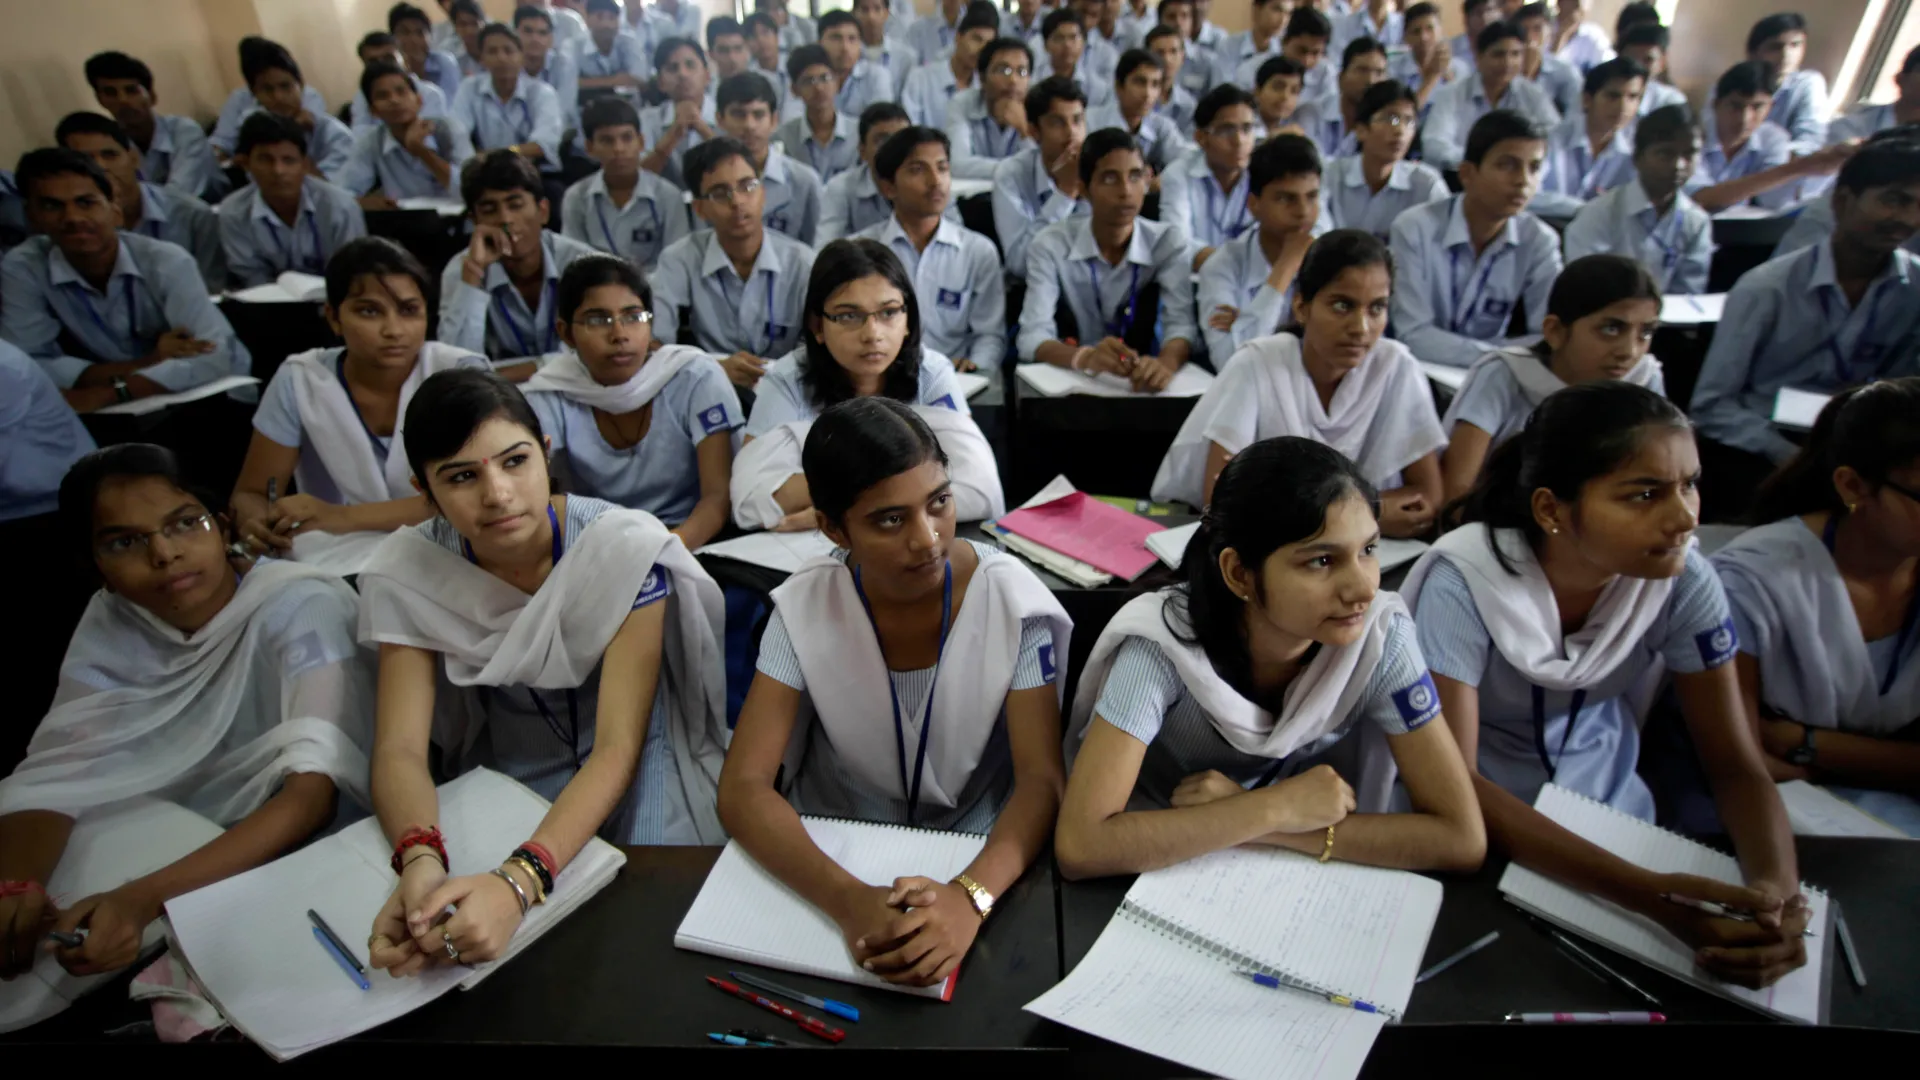 Crisis and Controversy Overhauling India's Medical Entrance Exams